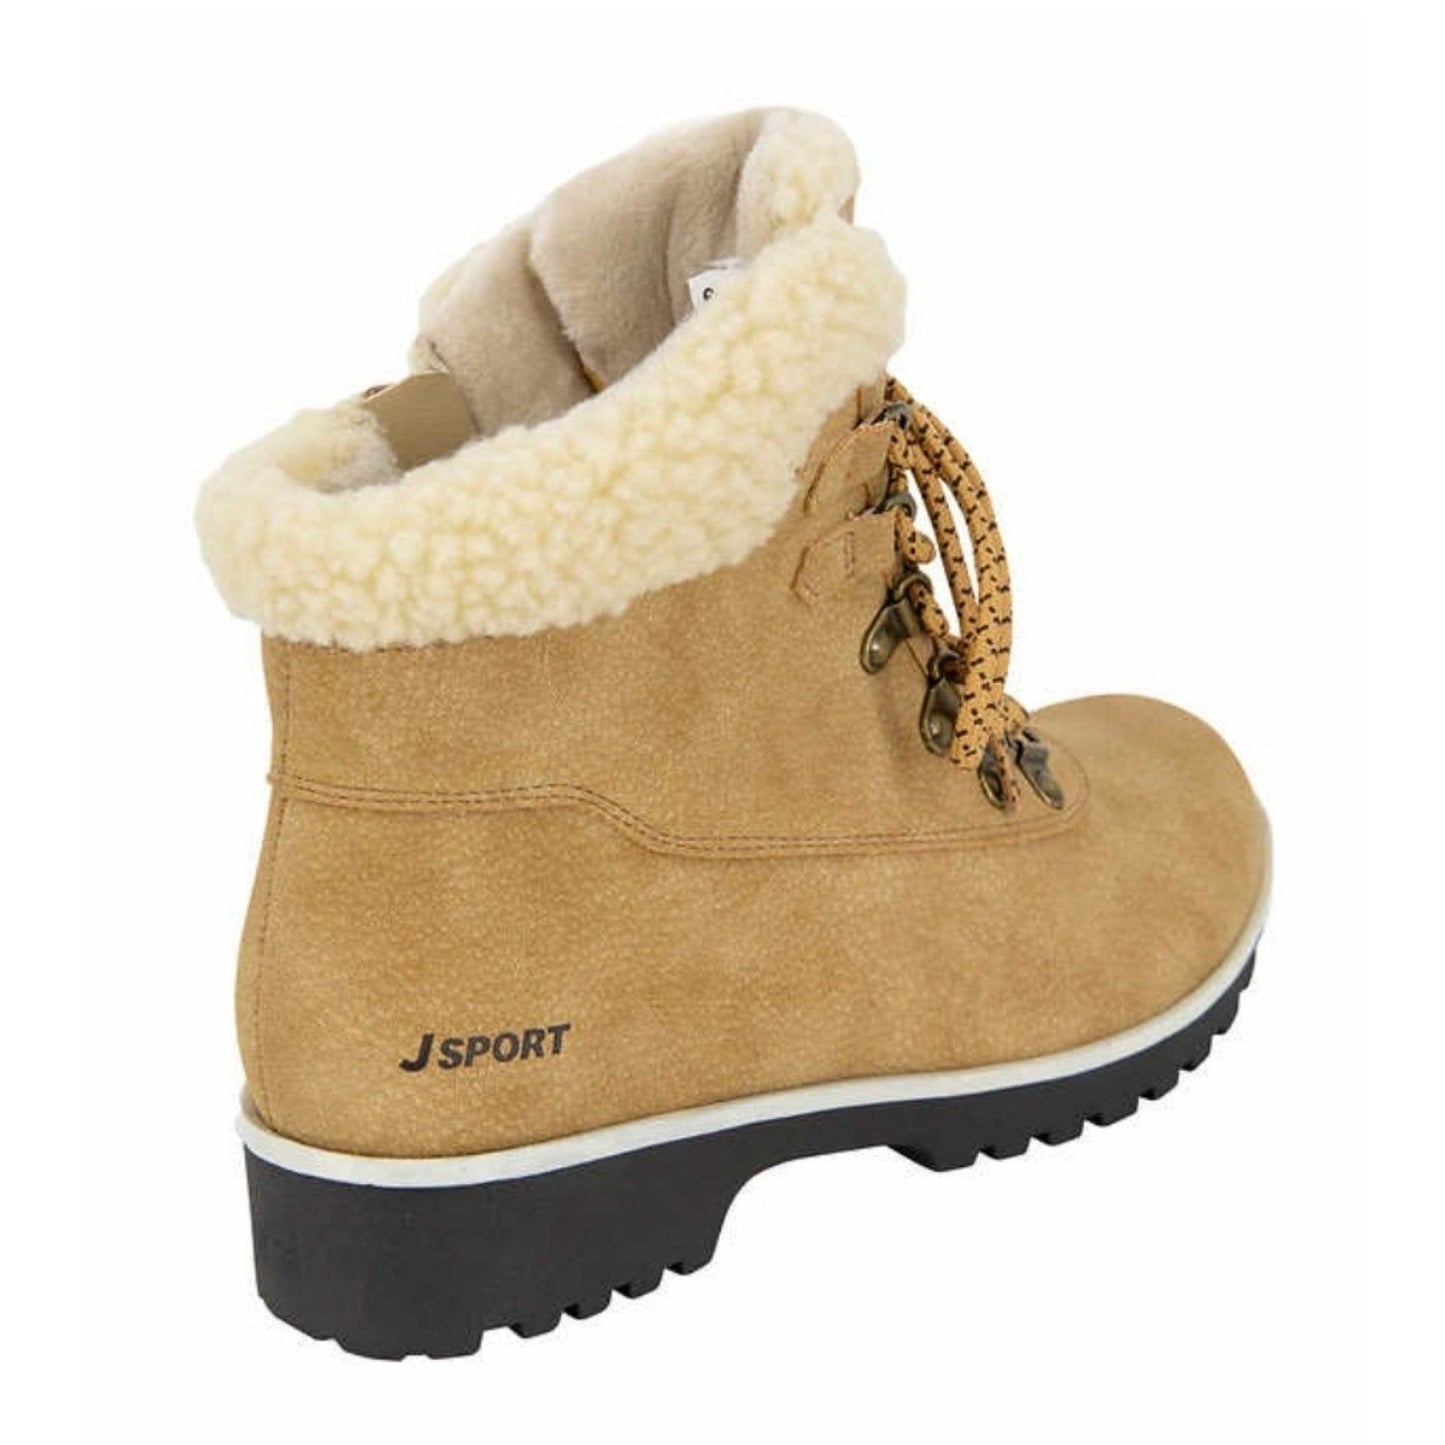 JSPORT Boots Woman's Faux Fur Shearling Hiking Outdoor Weather Ready